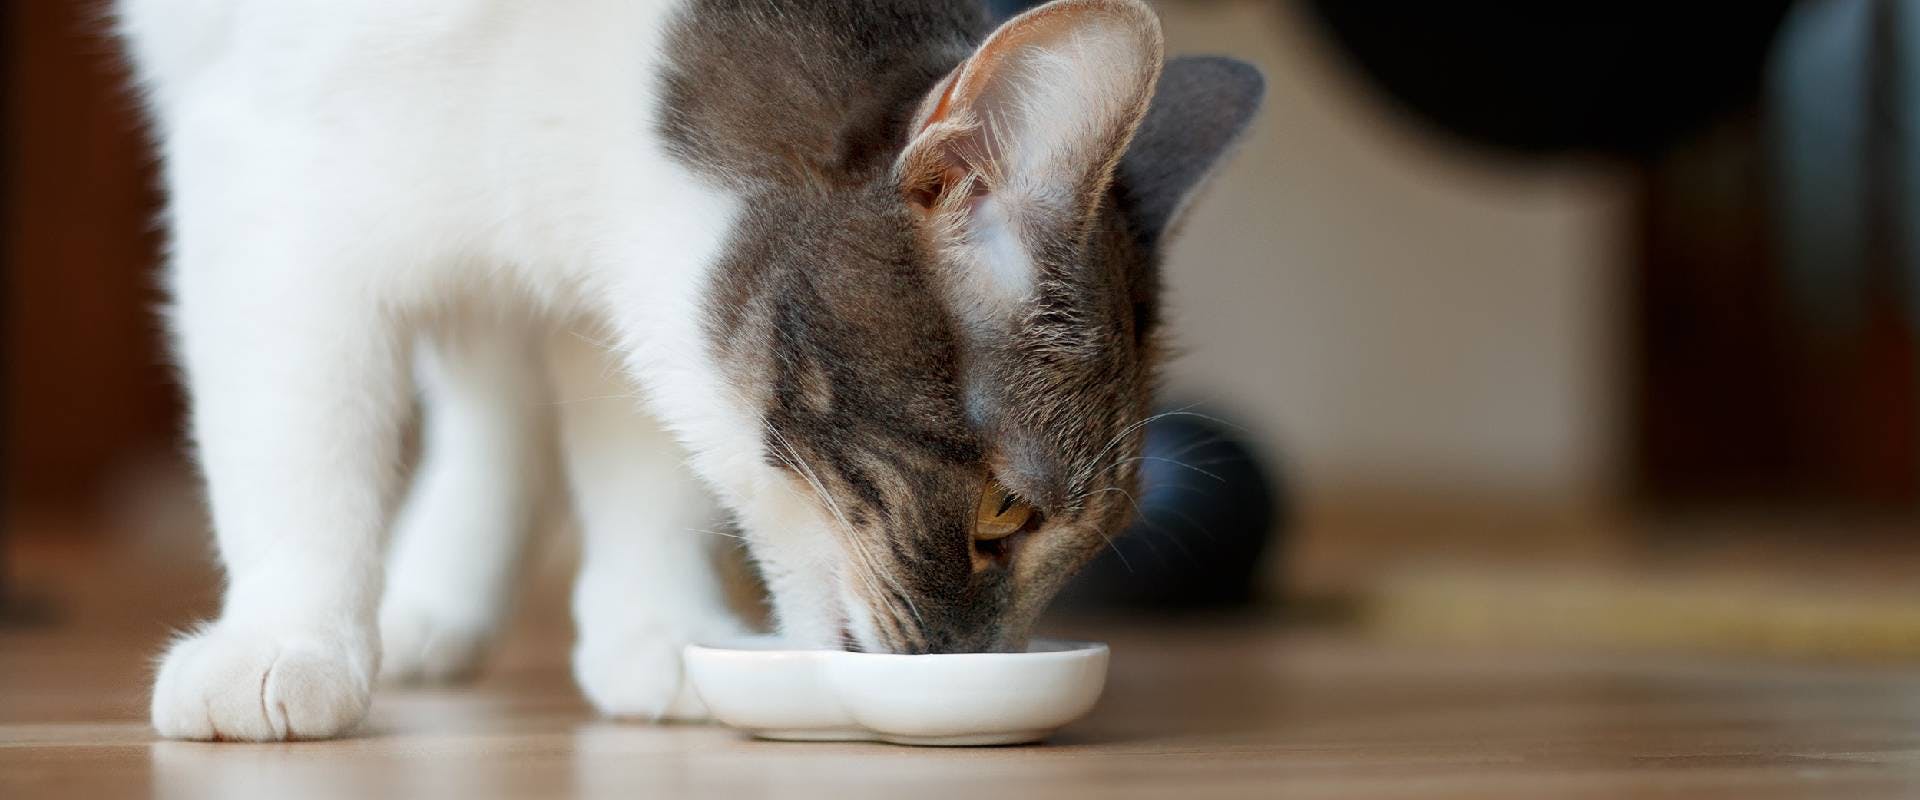 White and gray cat eating from a saucer